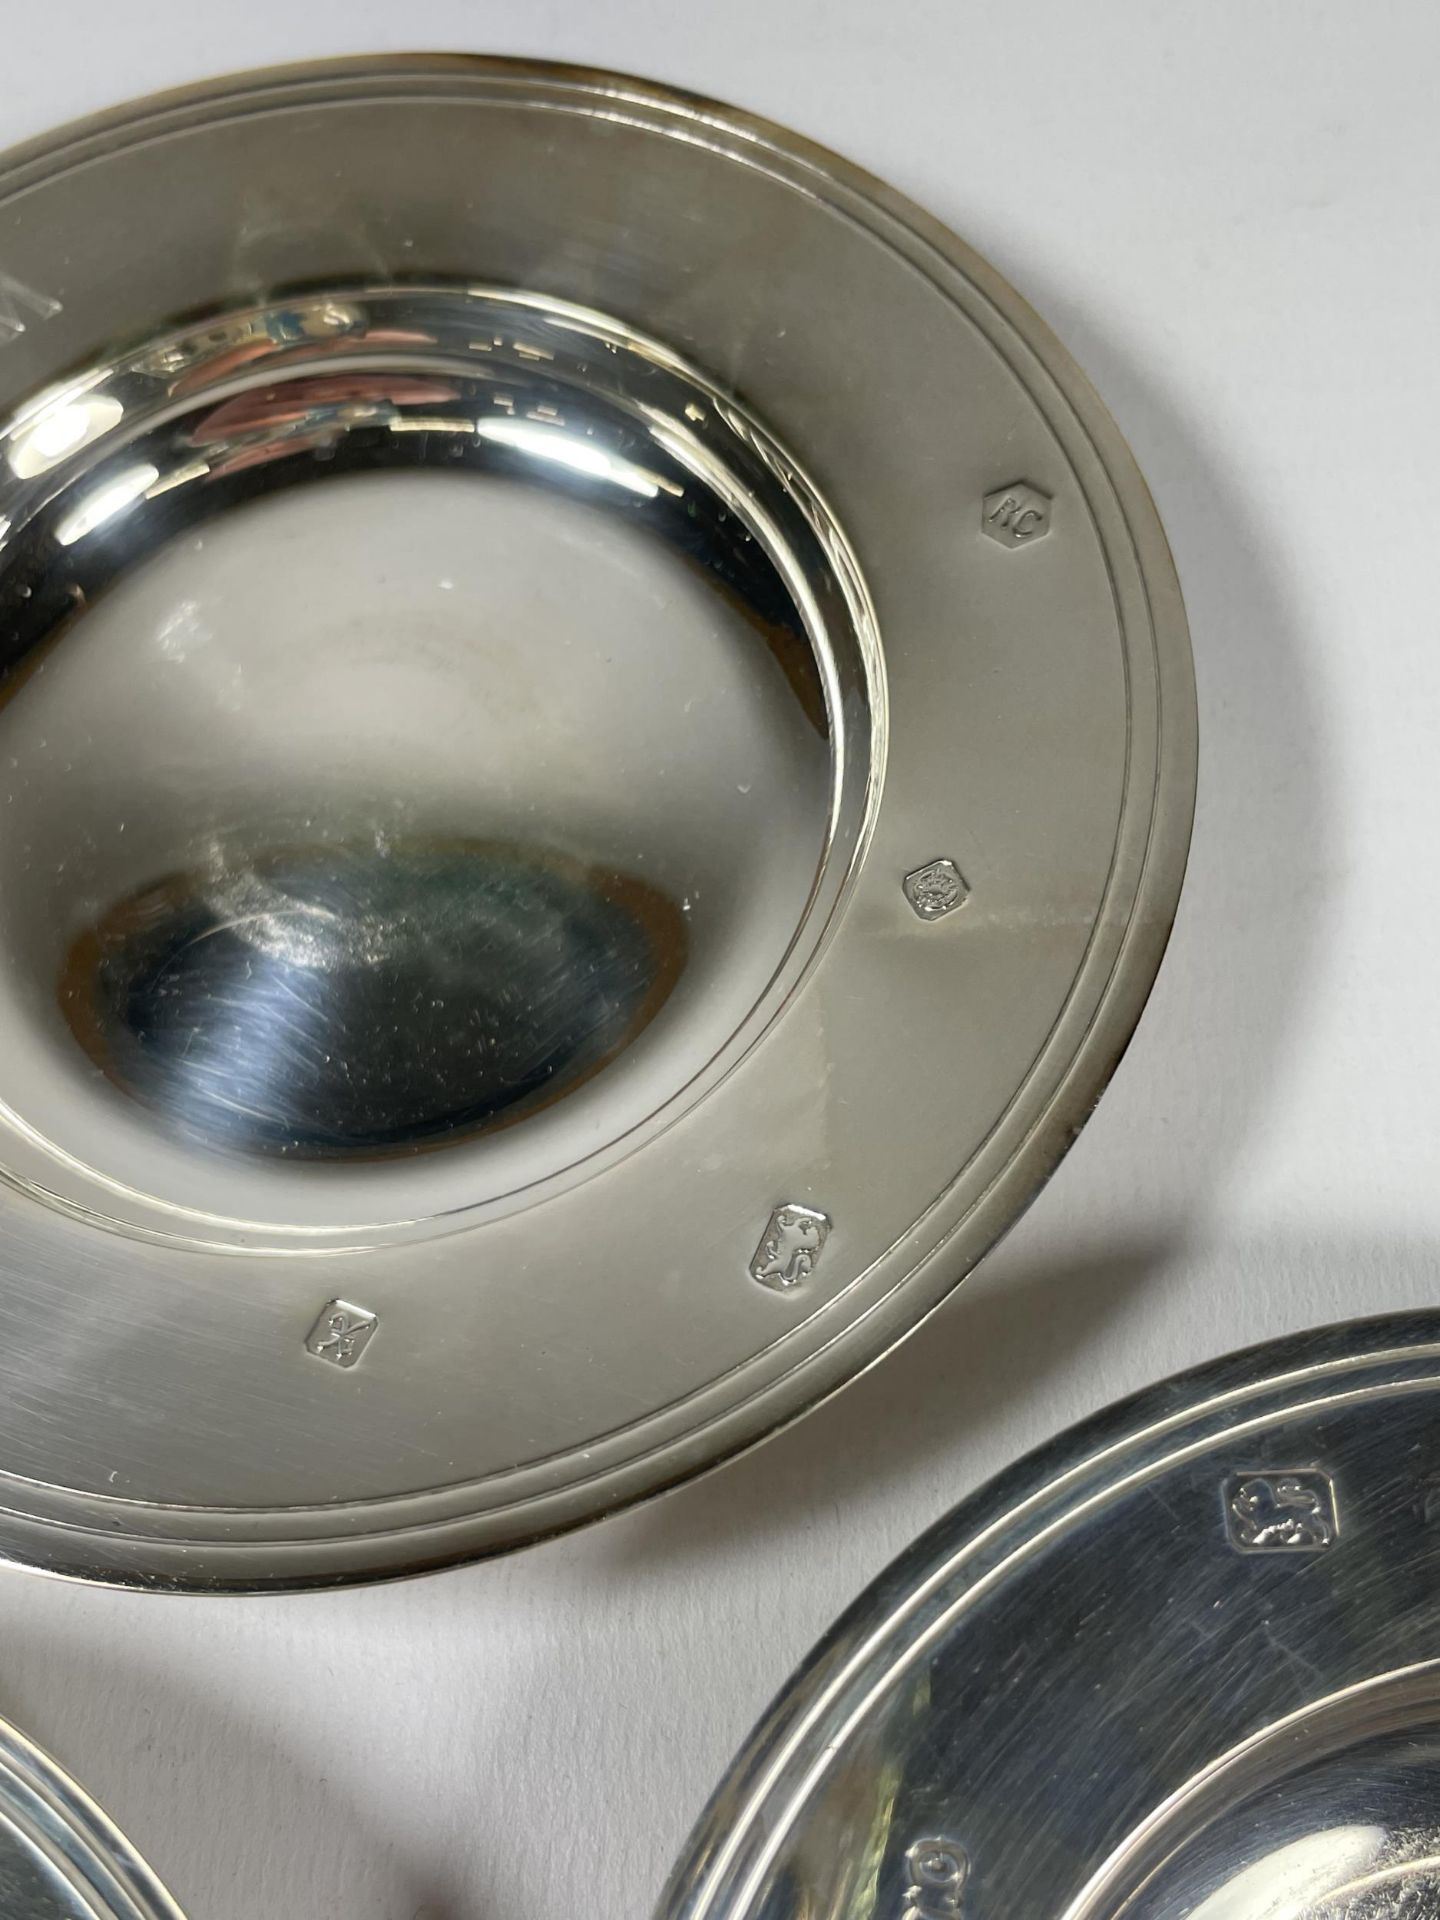 A SET OF THREE HALLMARKED SILVER DISHES MARKED 'W.G.C' BELIEVED FOR WILMSLOW GOLF CLUB, TOTAL WEIGHT - Image 4 of 4